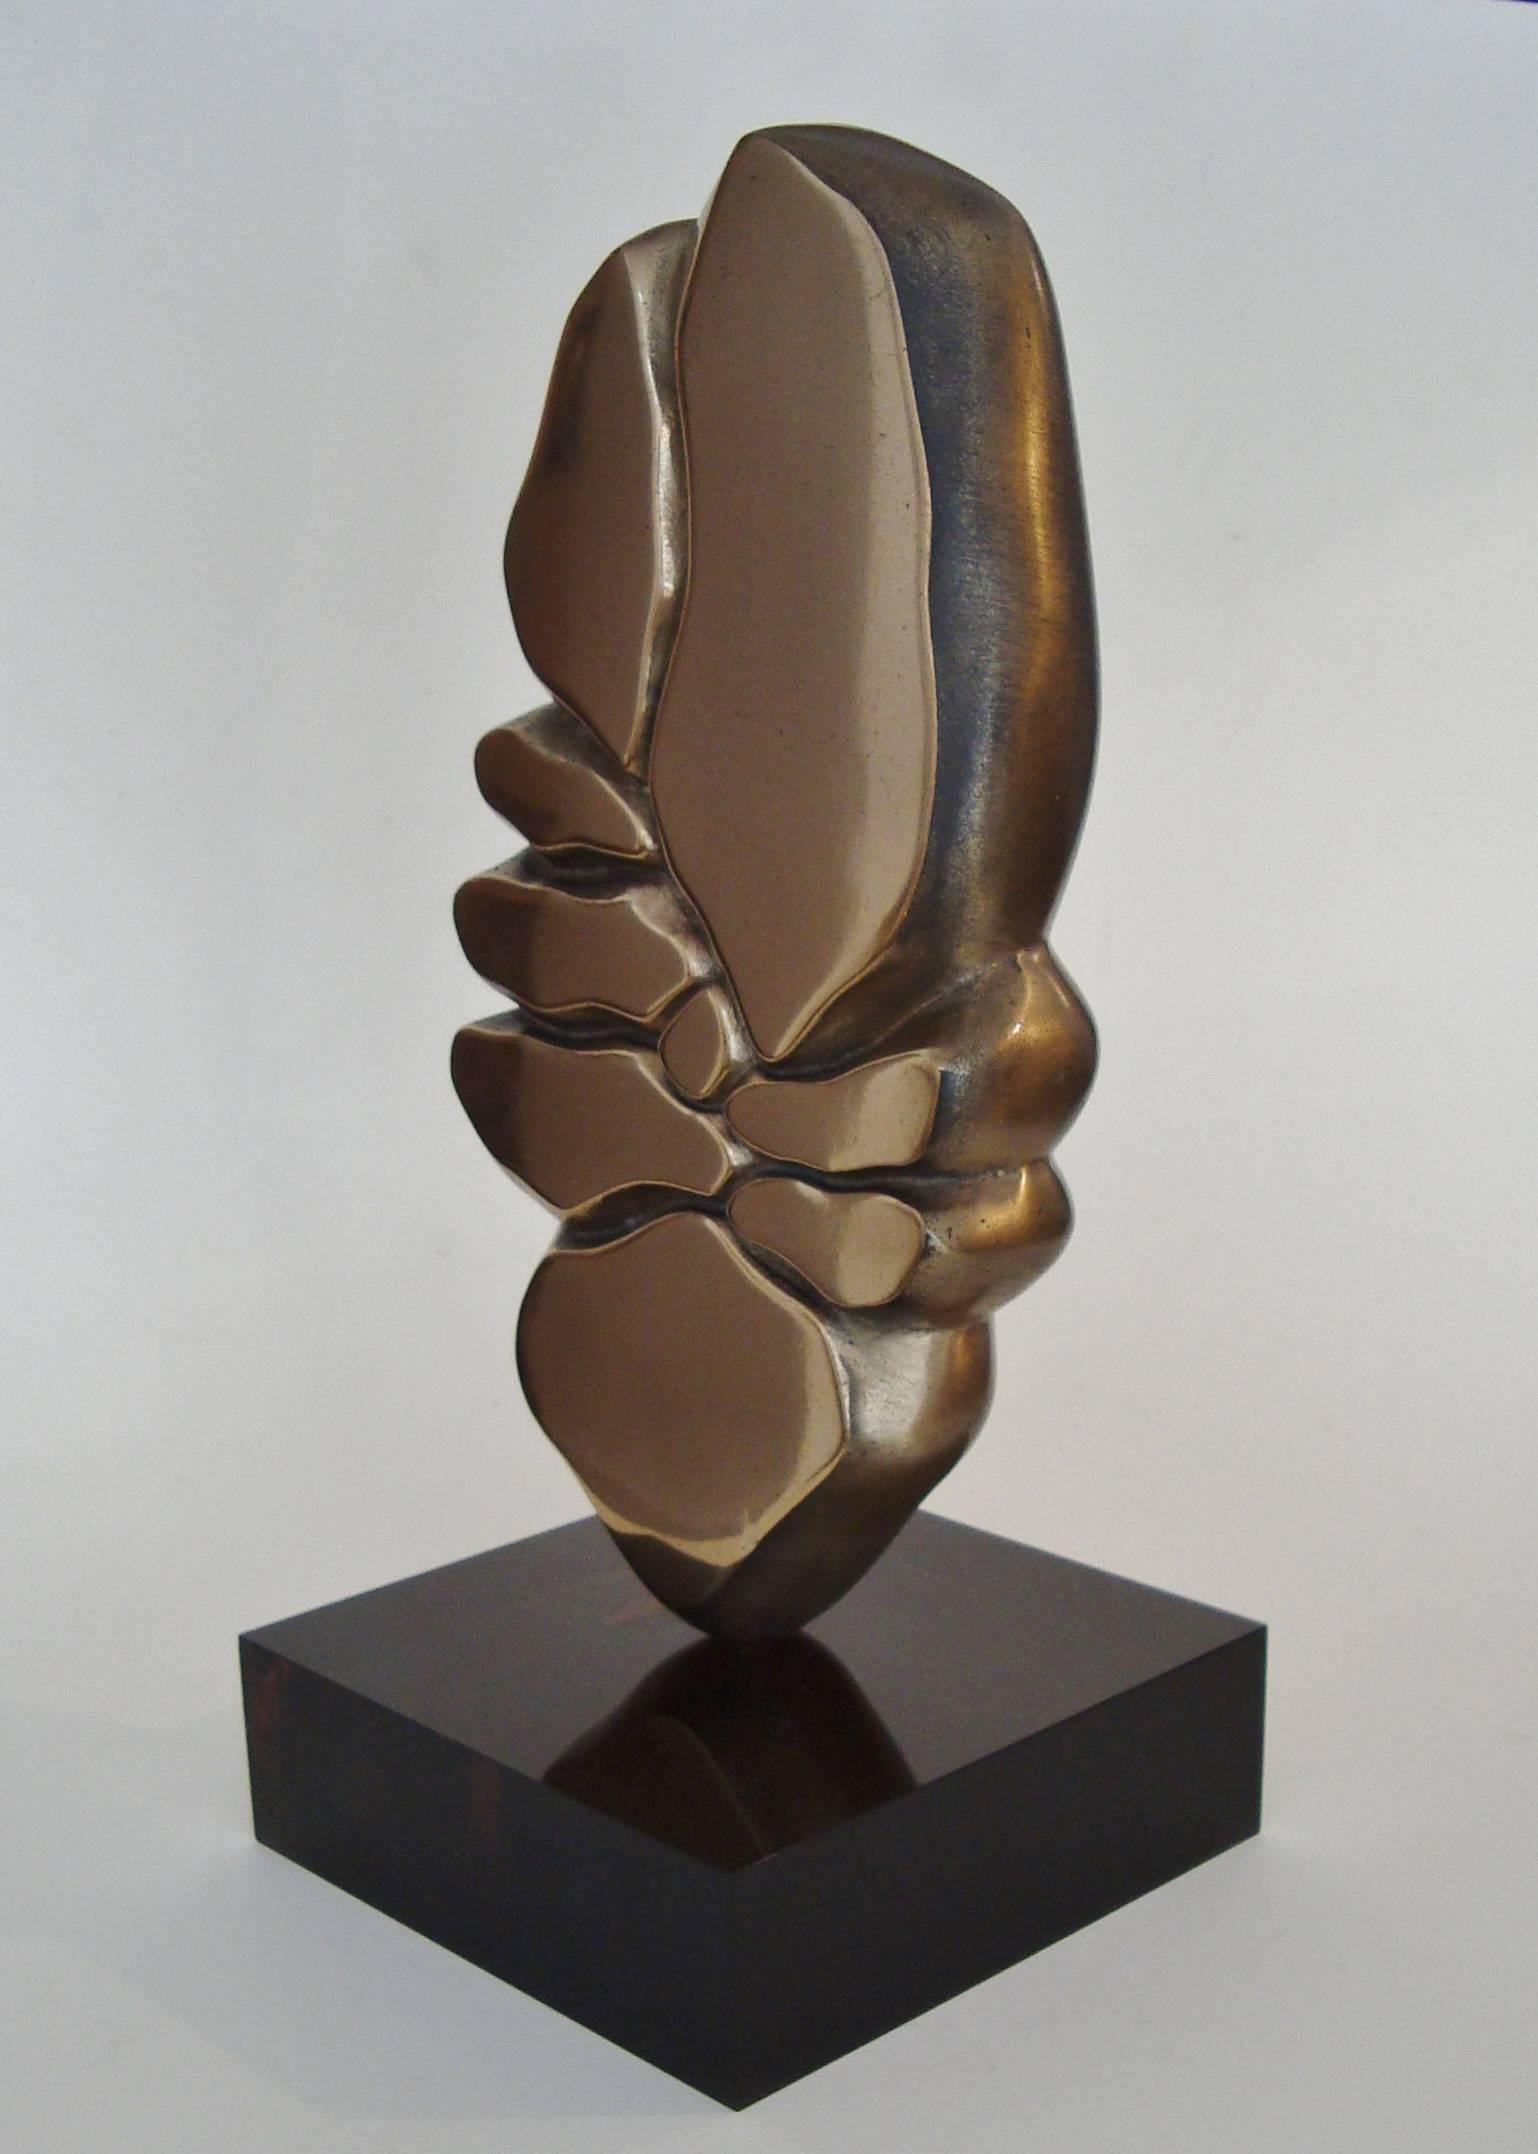 Gilt polished bronze sculpture by Minoru Kano (Tokyo 1930-2007).
A polished and a mate face. On a brown plexiglas base. 
Signed, numbered 2/25.
Bronze height 32 x 15 x d 6 cm.
Base 5 x 16 cm.

The sculptor was born in japan but he early came